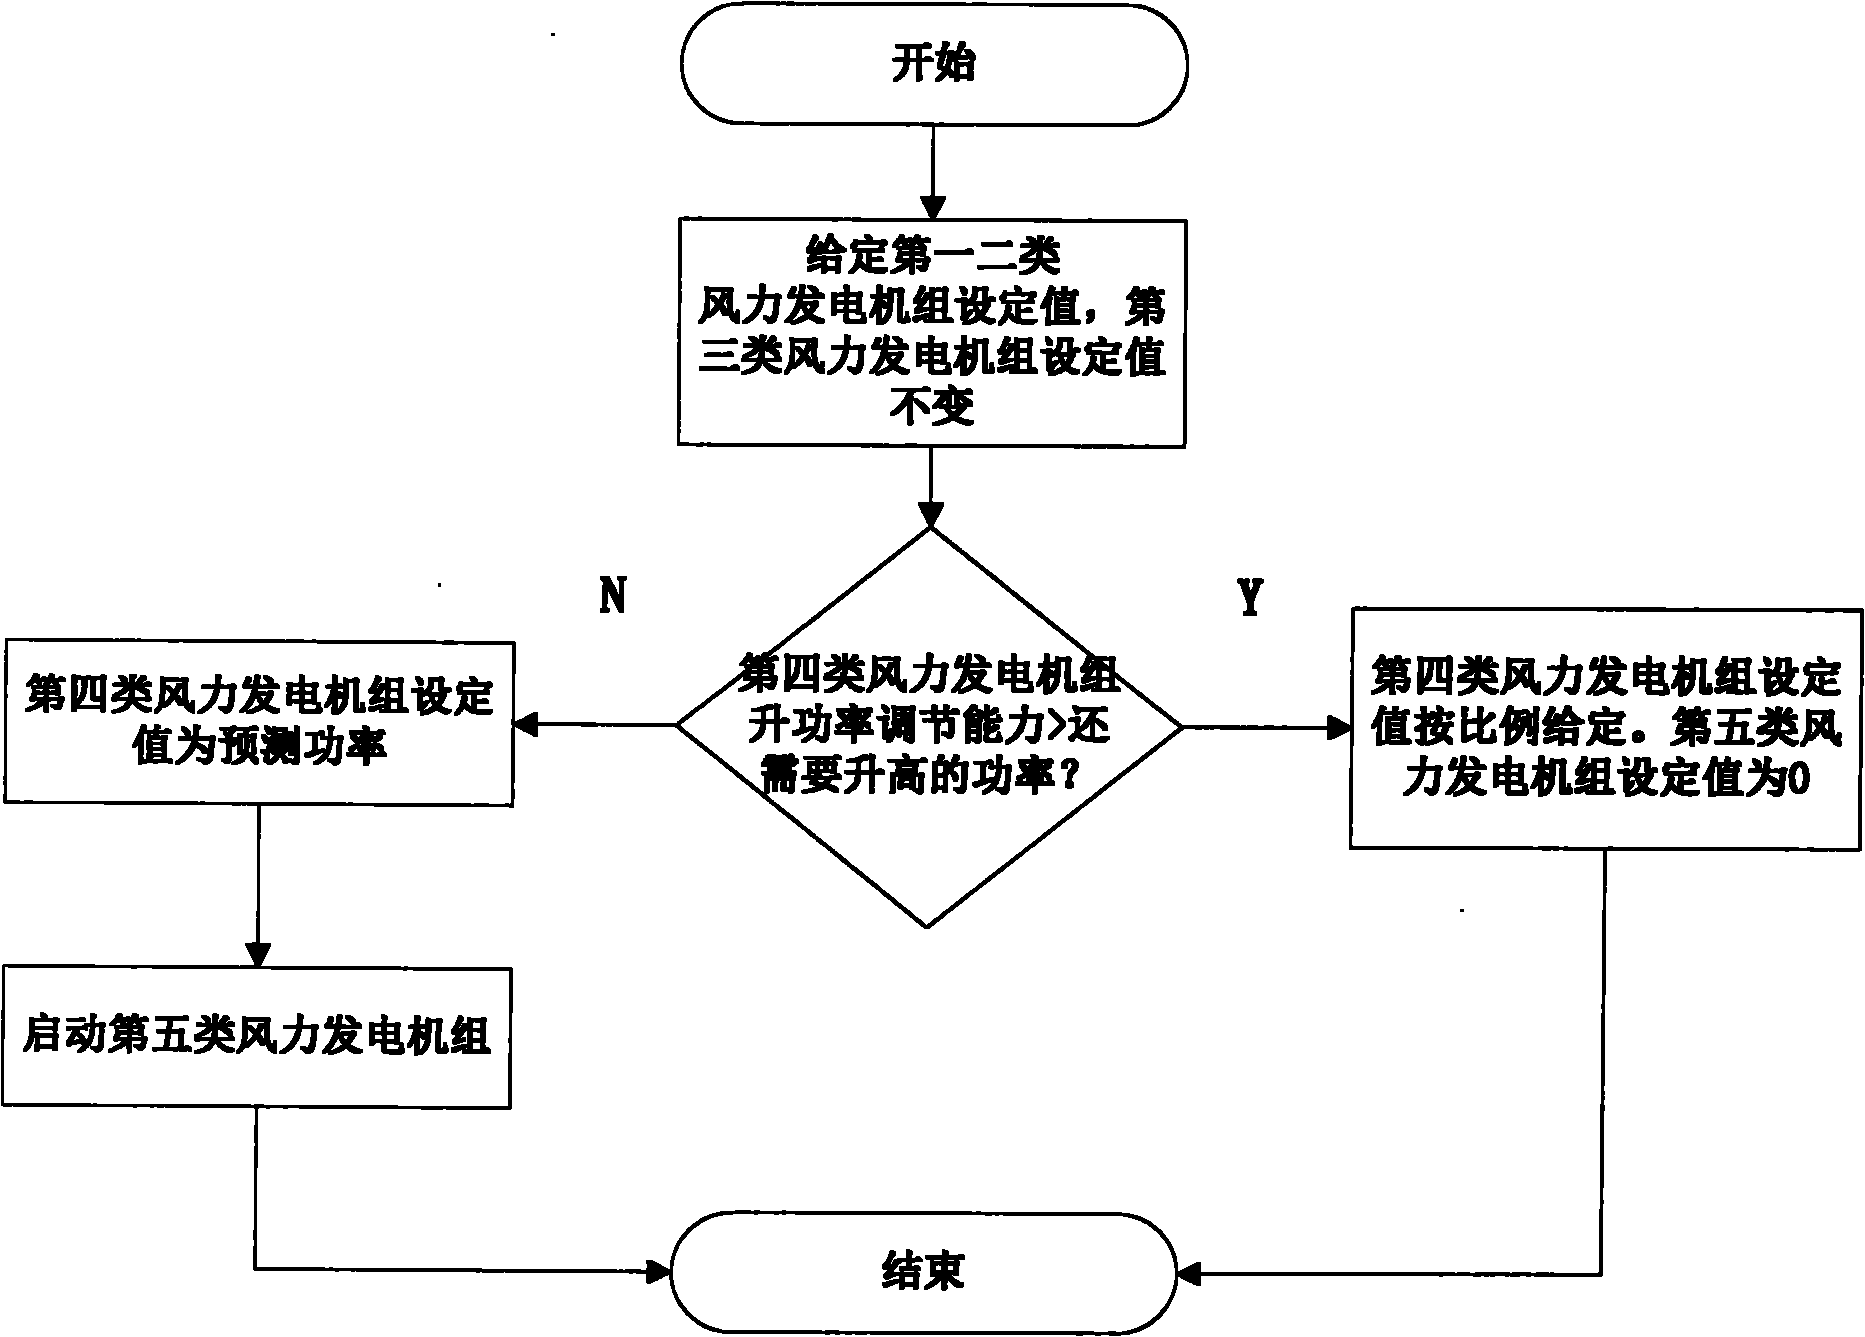 Method for distributing active power of wind power station